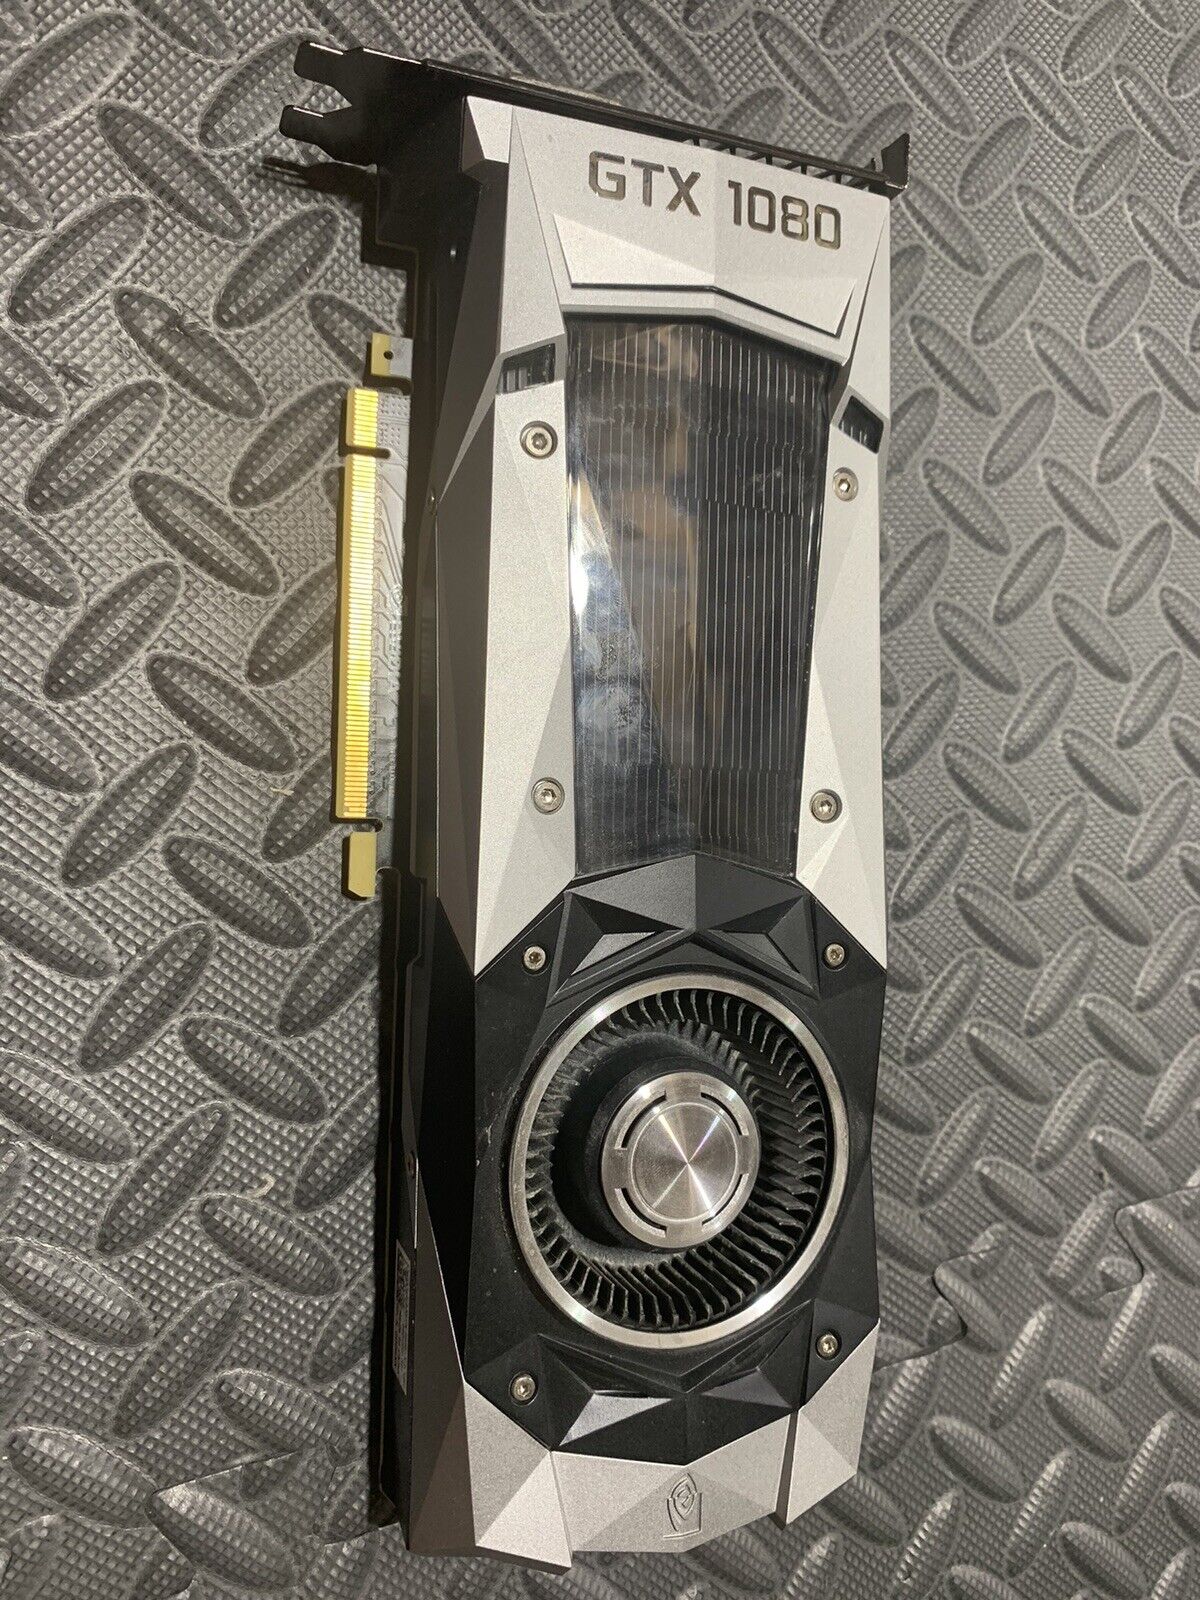 NVIDIA GeForce GTX 1080 Founders Edition 8GB GDDR5X Video Graphics Card